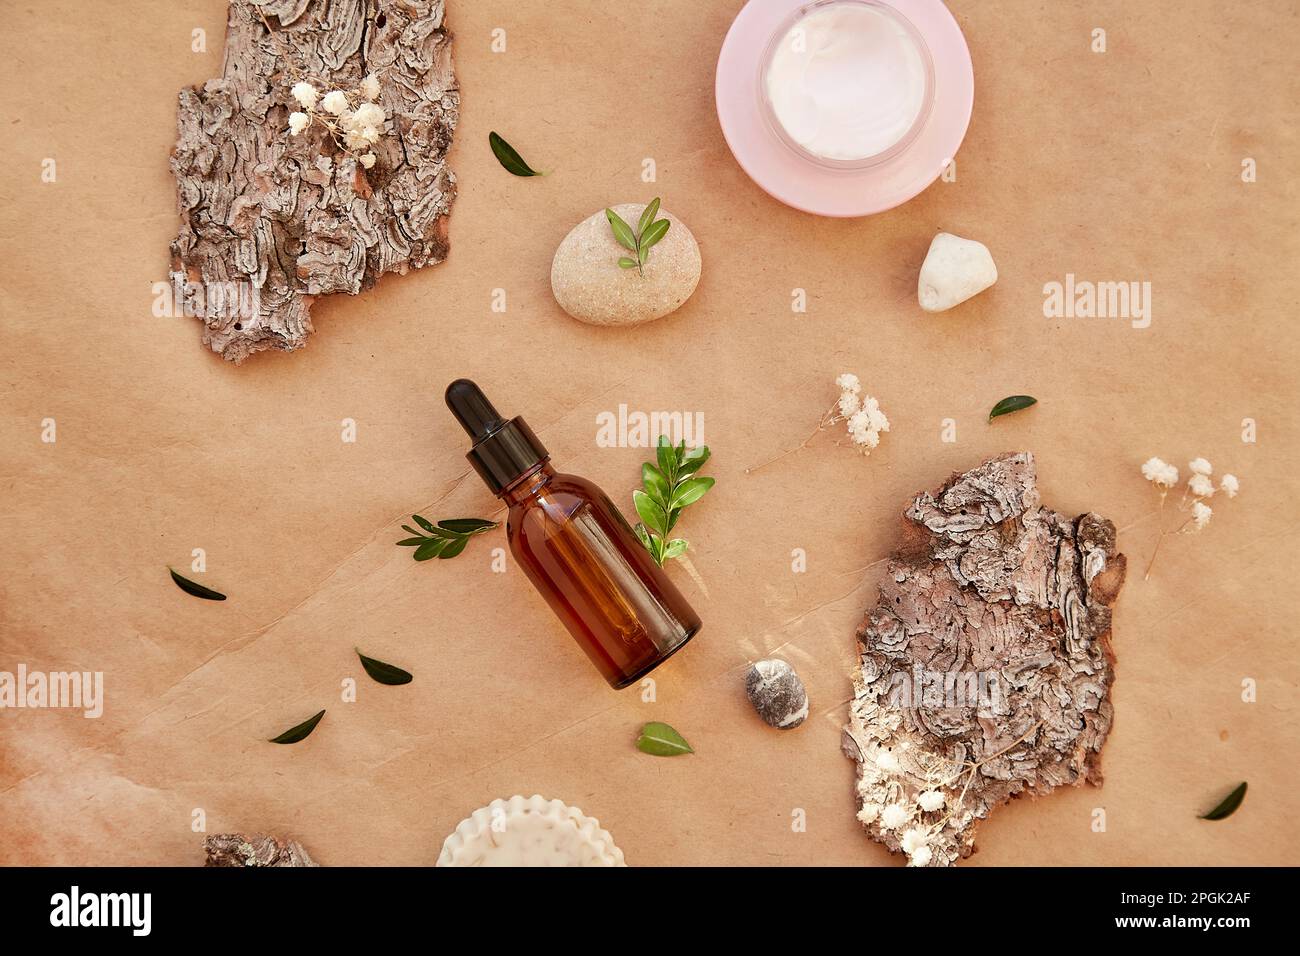 Dropper glass bottle, hyaluronic acid, mucin cream - natural beauty products. Natural beauty treatments among tree bark and pebbles. Stock Photo